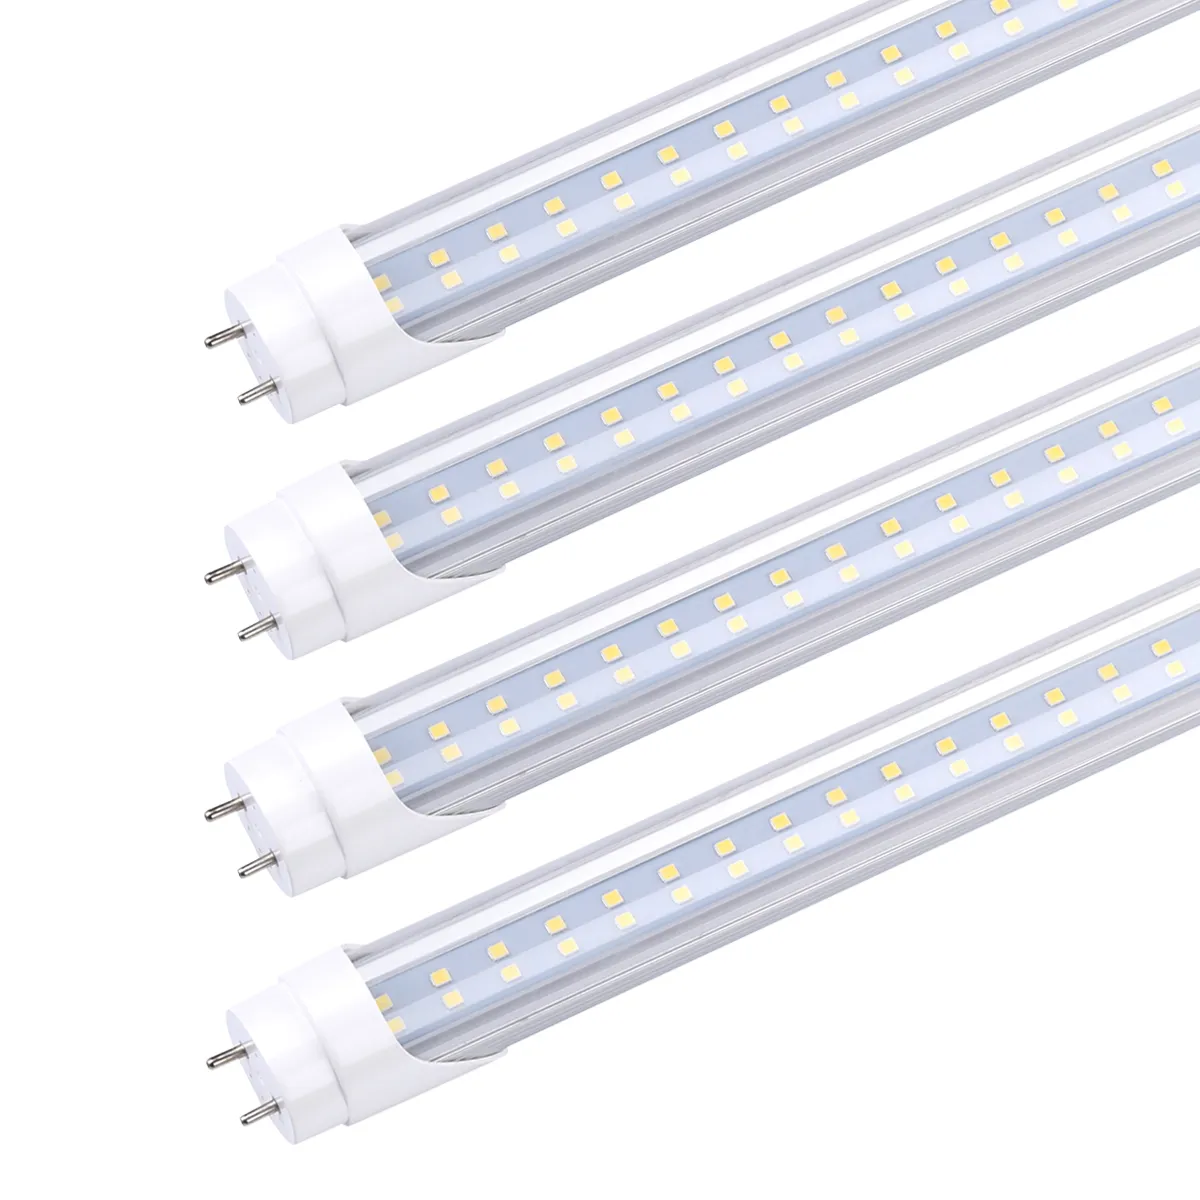 T8 LED Tube Light Bulb,4FT 22W 28W,G13 Bi-Pin,T8 T10 T12 Fluorescent Lighting Bulbs Replacement,Ballast Bypass,Double Ended Power,Clear Cover,4 Foot Shop Lights